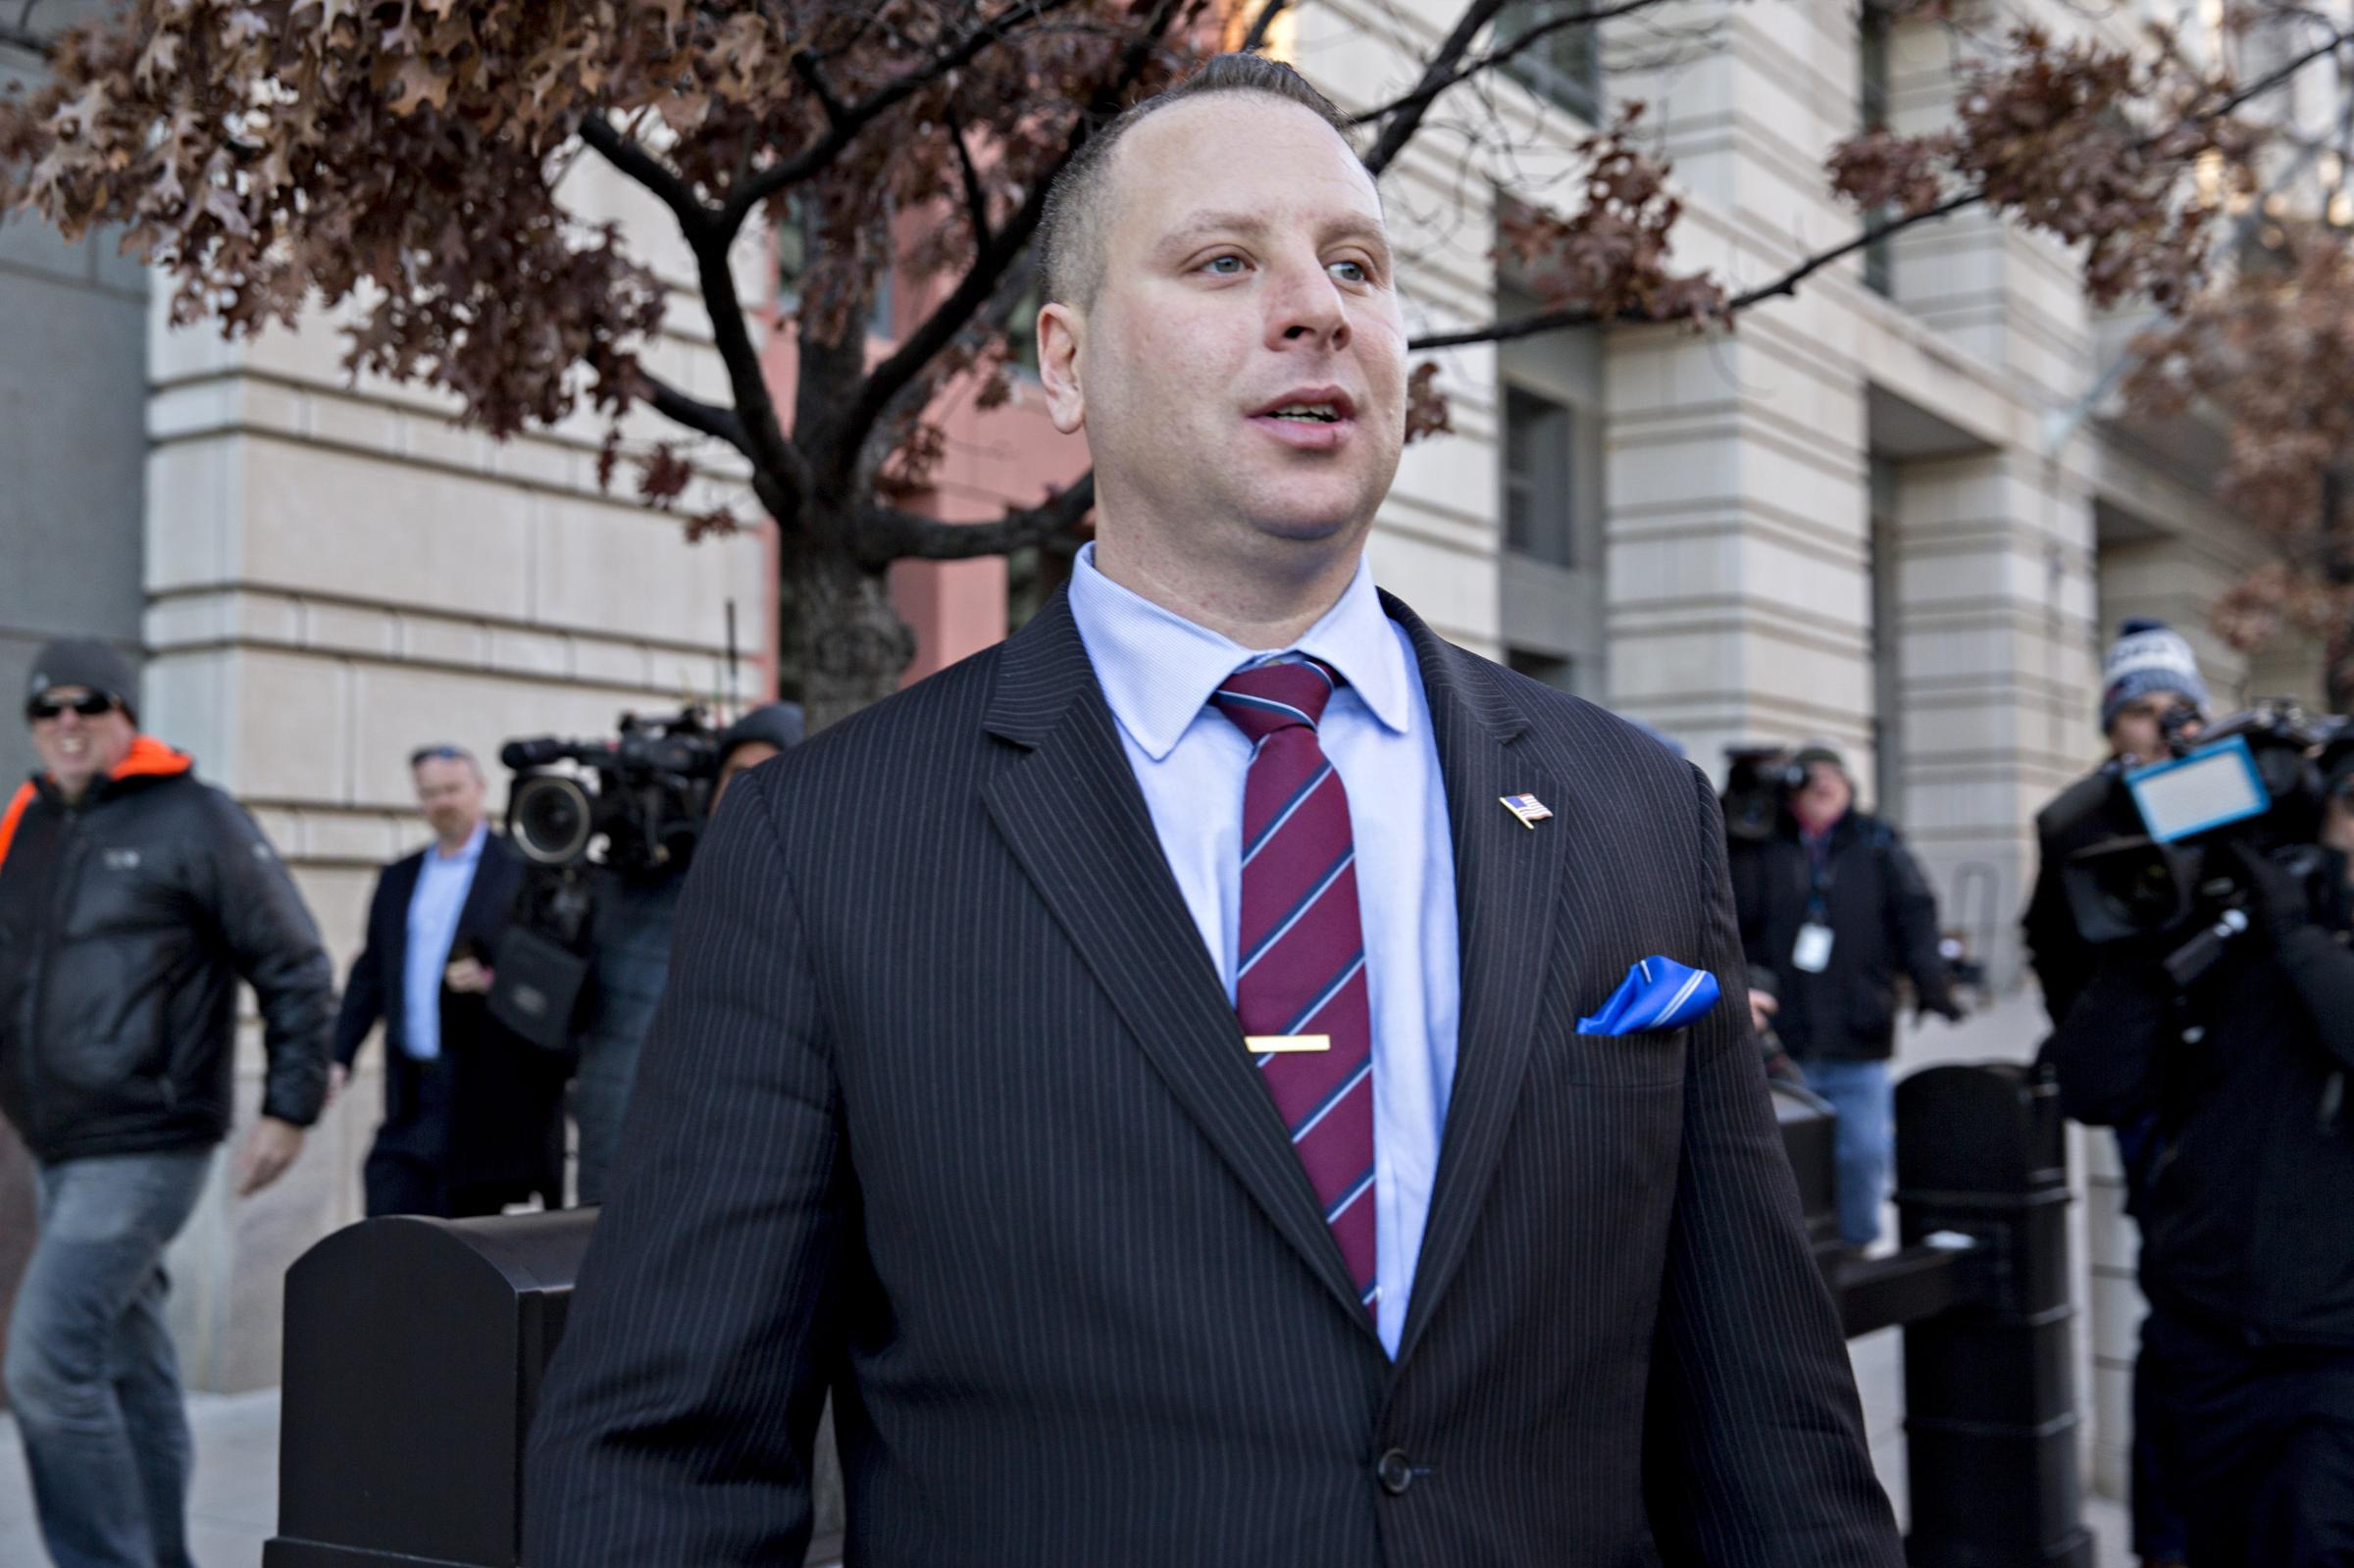 Former Trump Campaign Aide Sam Nunberg Appears For Mueller's Grand Jury